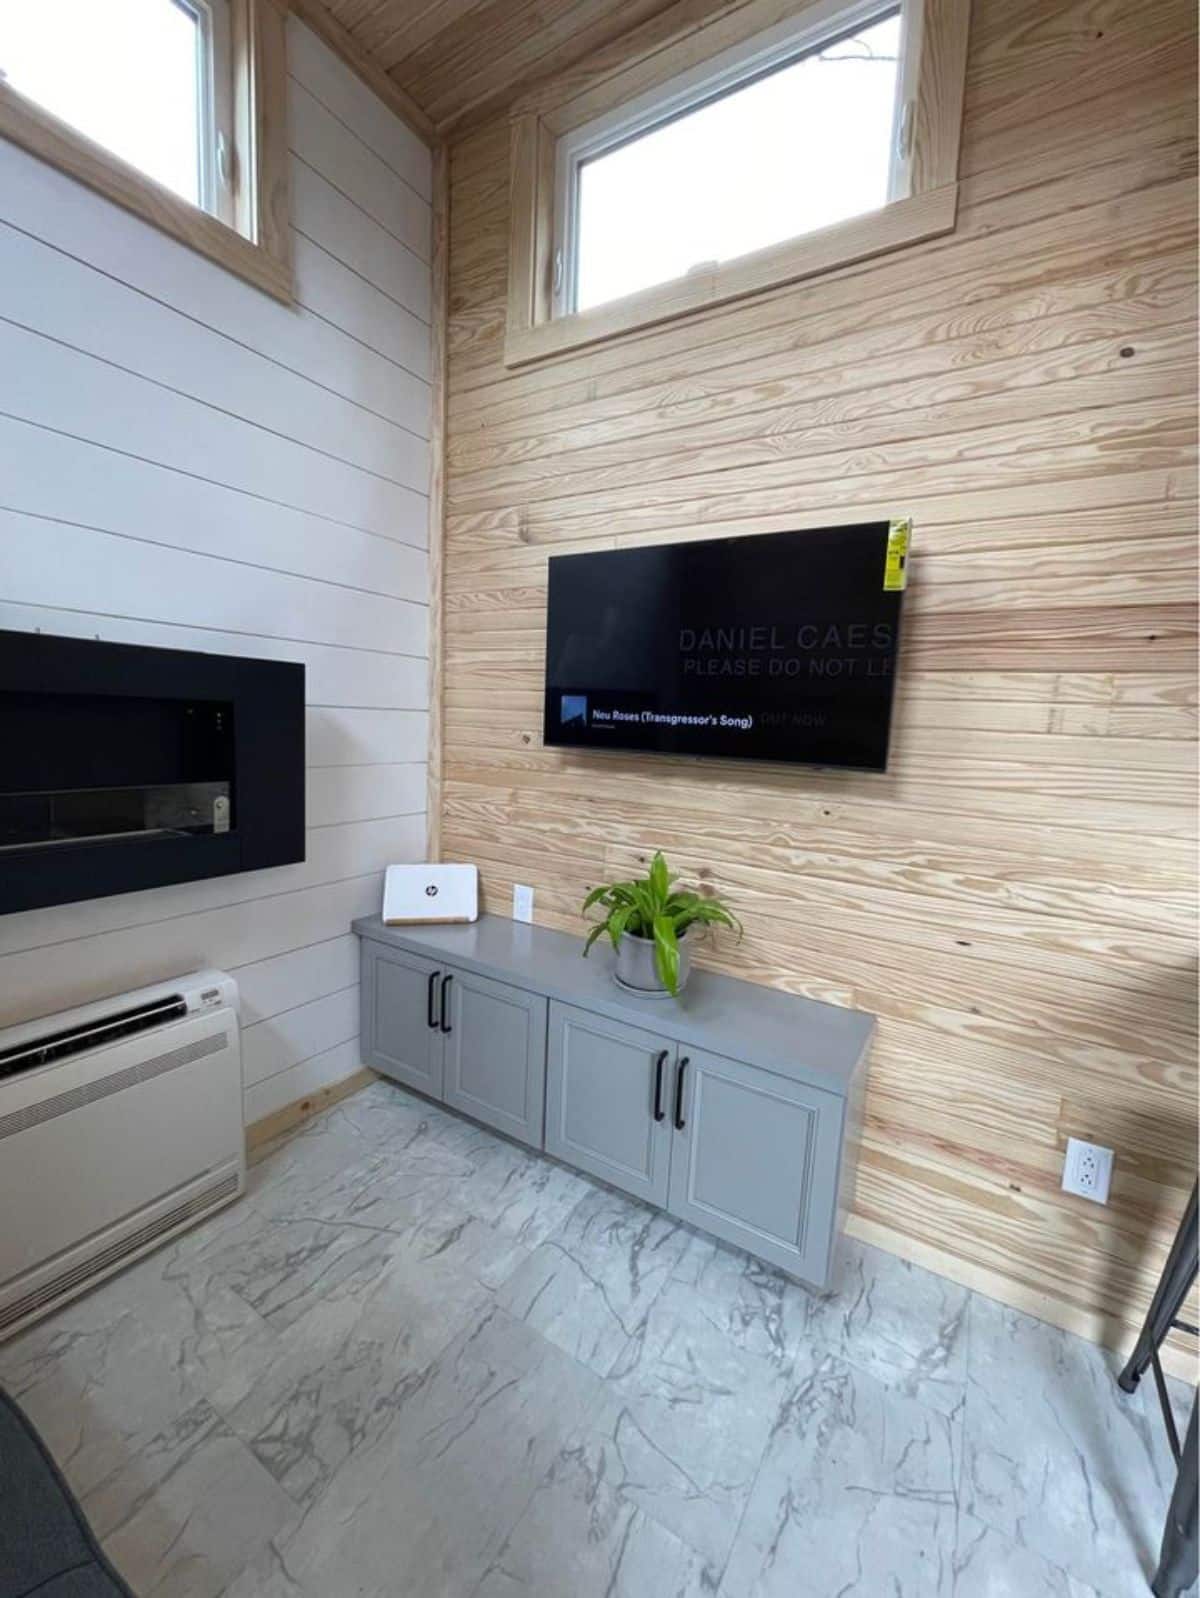 Opposite to the couch there is wall mounted television set with small wooden storage table